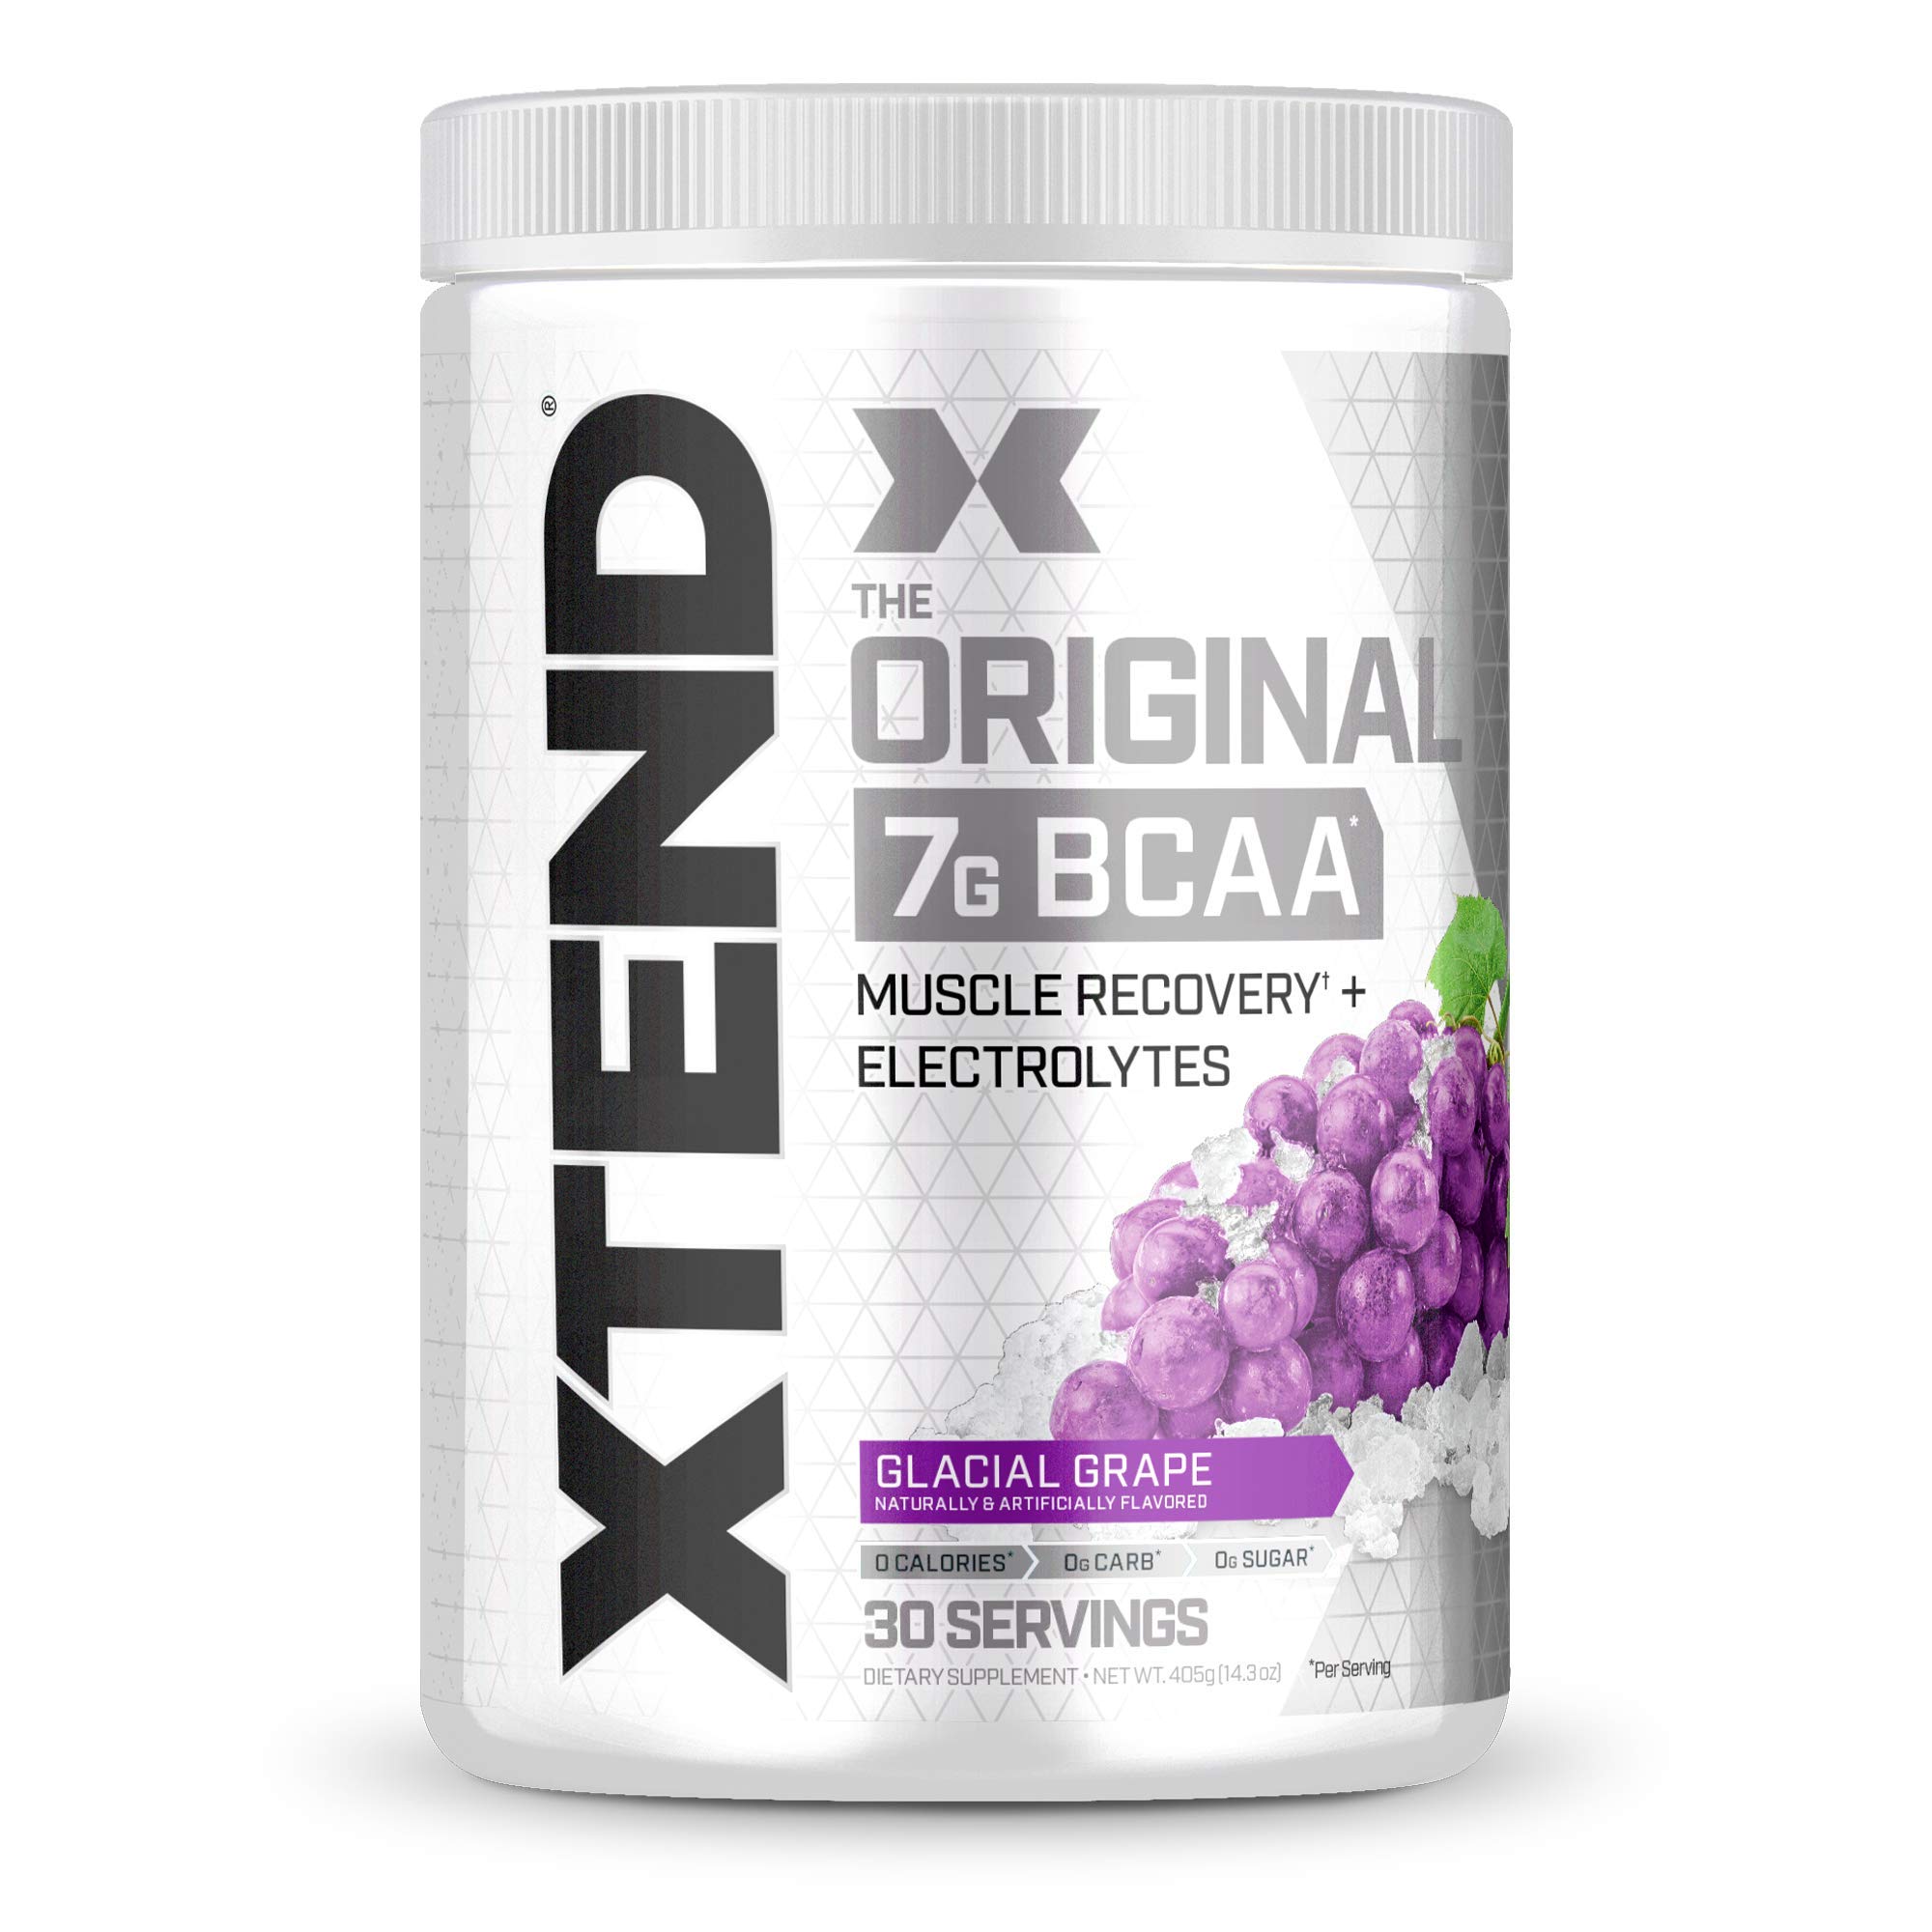 XTEND Original BCAA Powder Glacial Grape | Sugar Free Post Workout Muscle Recovery Drink with Amino Acids | 7g BCAAs for Men & Women | 30 Servings